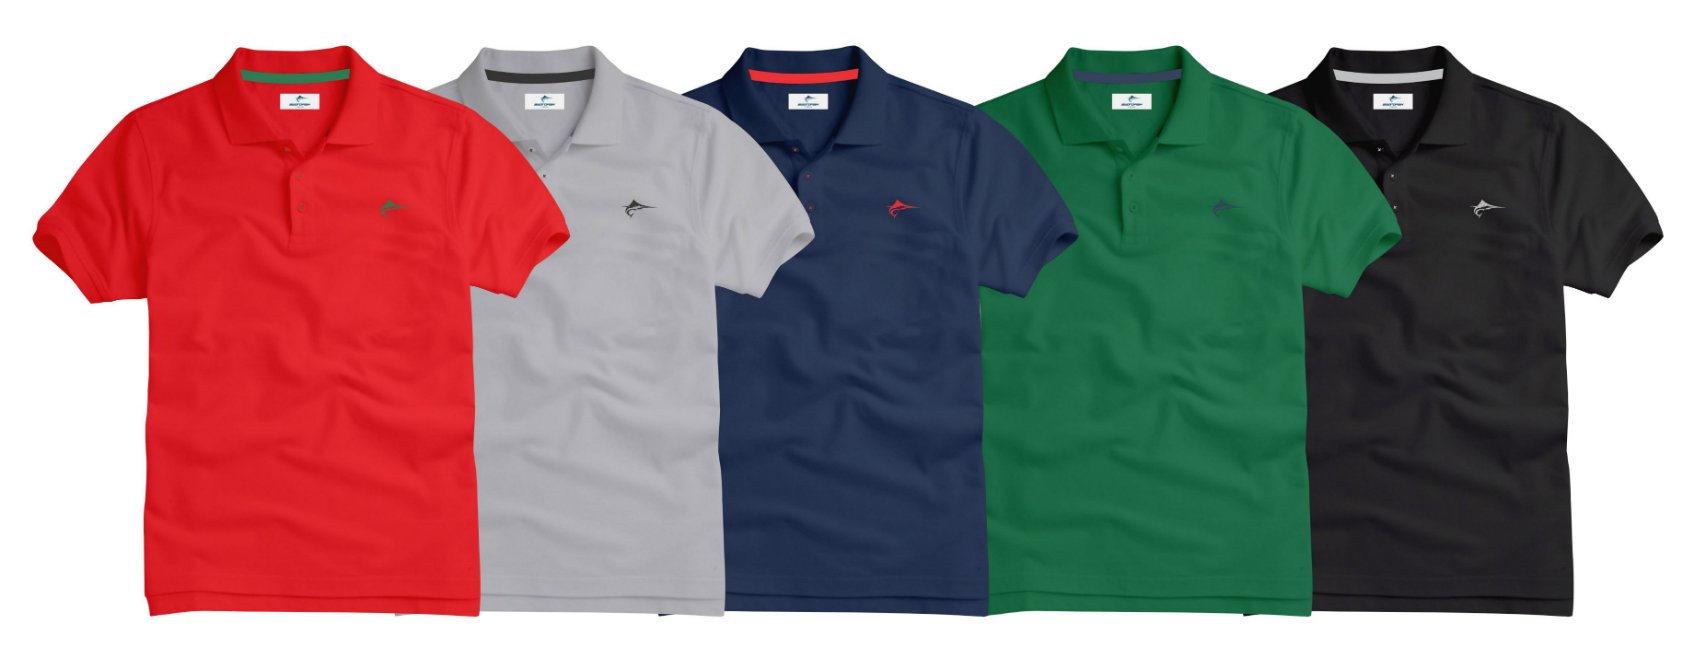 Slim Fit Pique Polo Shirt - Pack of Five - Size LARGE